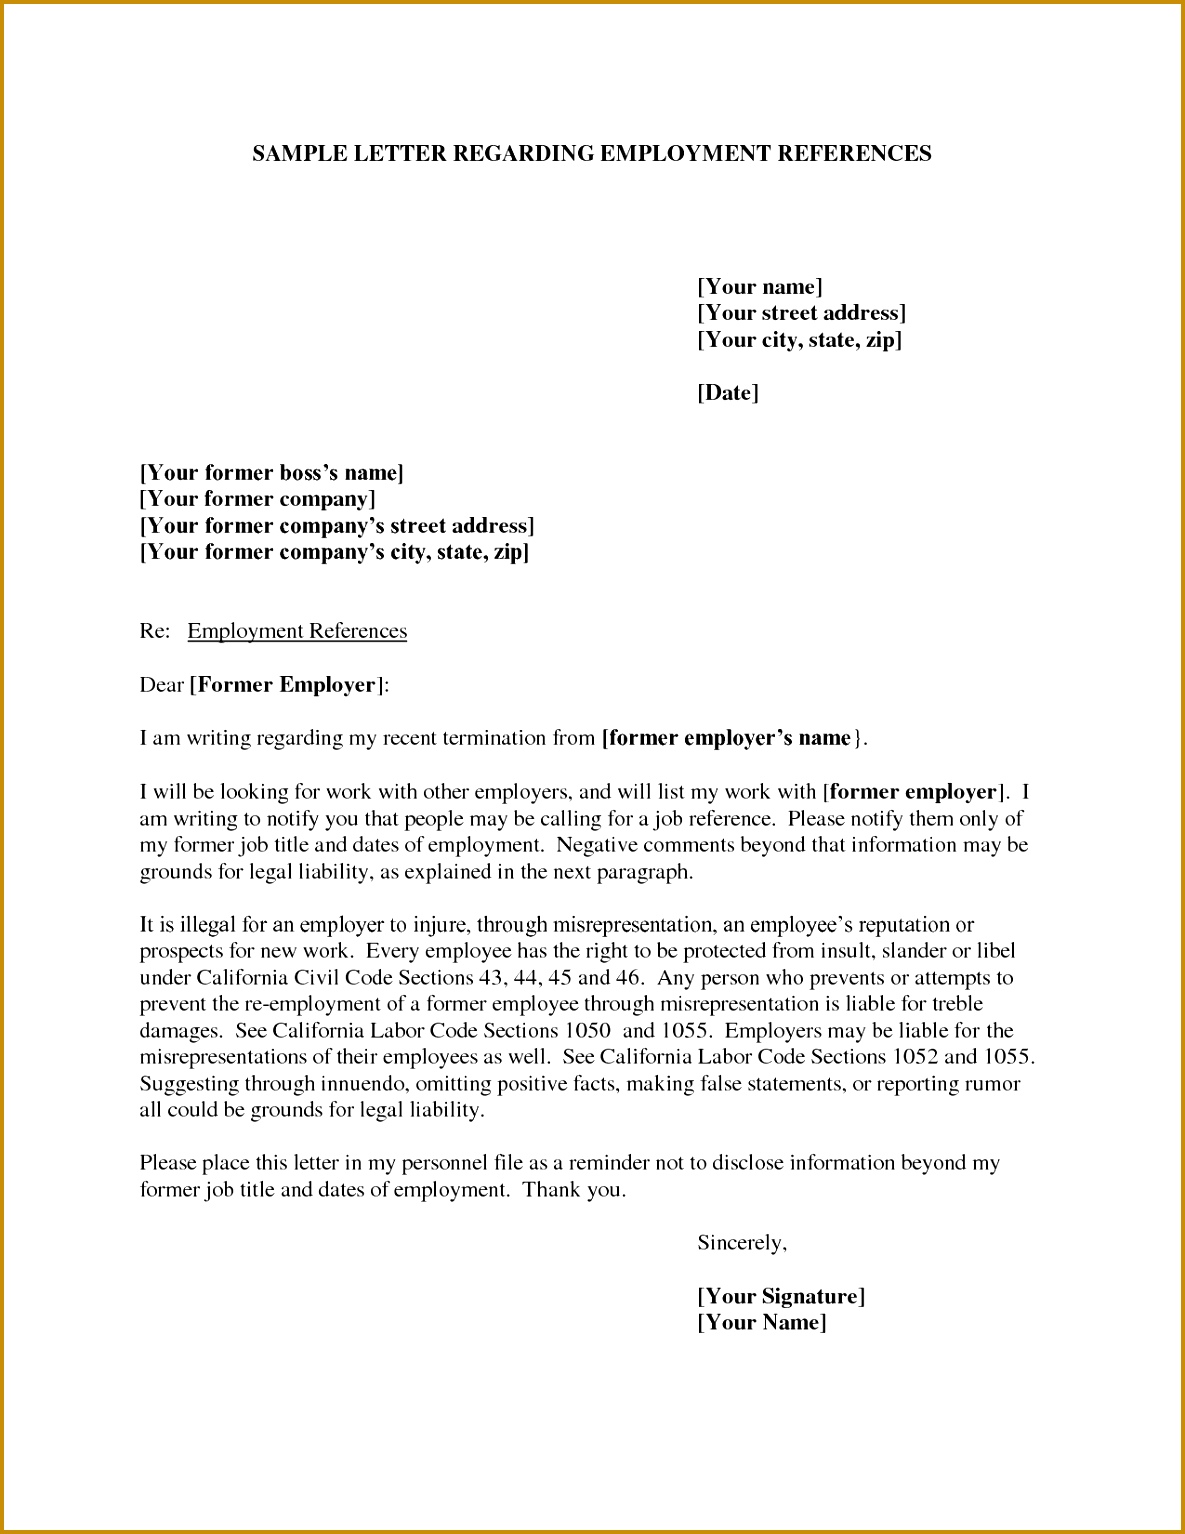 Employment Reference Letter Samples Free The Letter Sample Doc Employment Reference Letters Employee Reference With 15341185